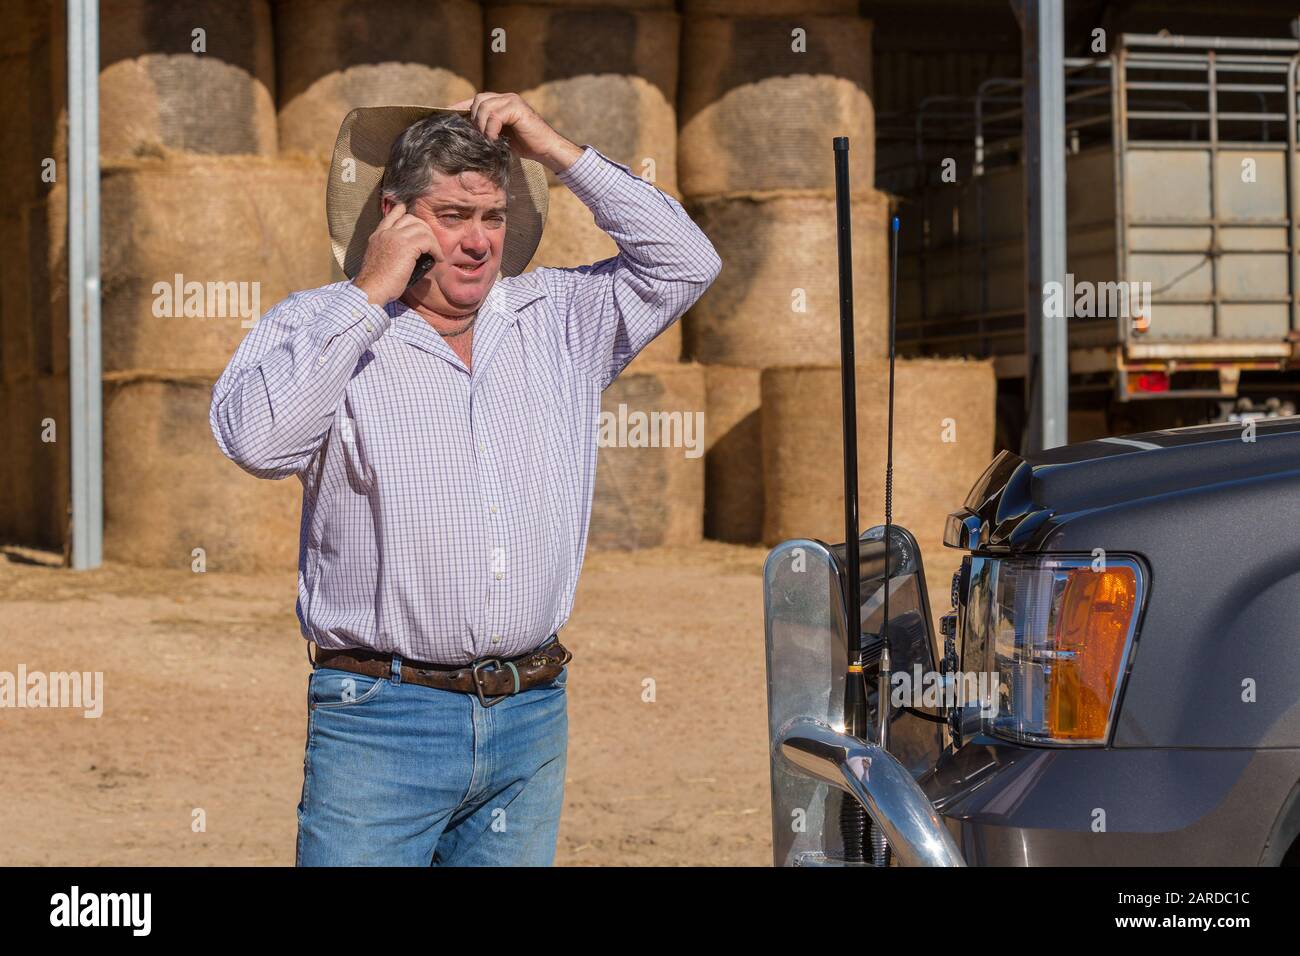 Farmer on cell phone near truck with antennas looking confused and scratching his head Stock Photo